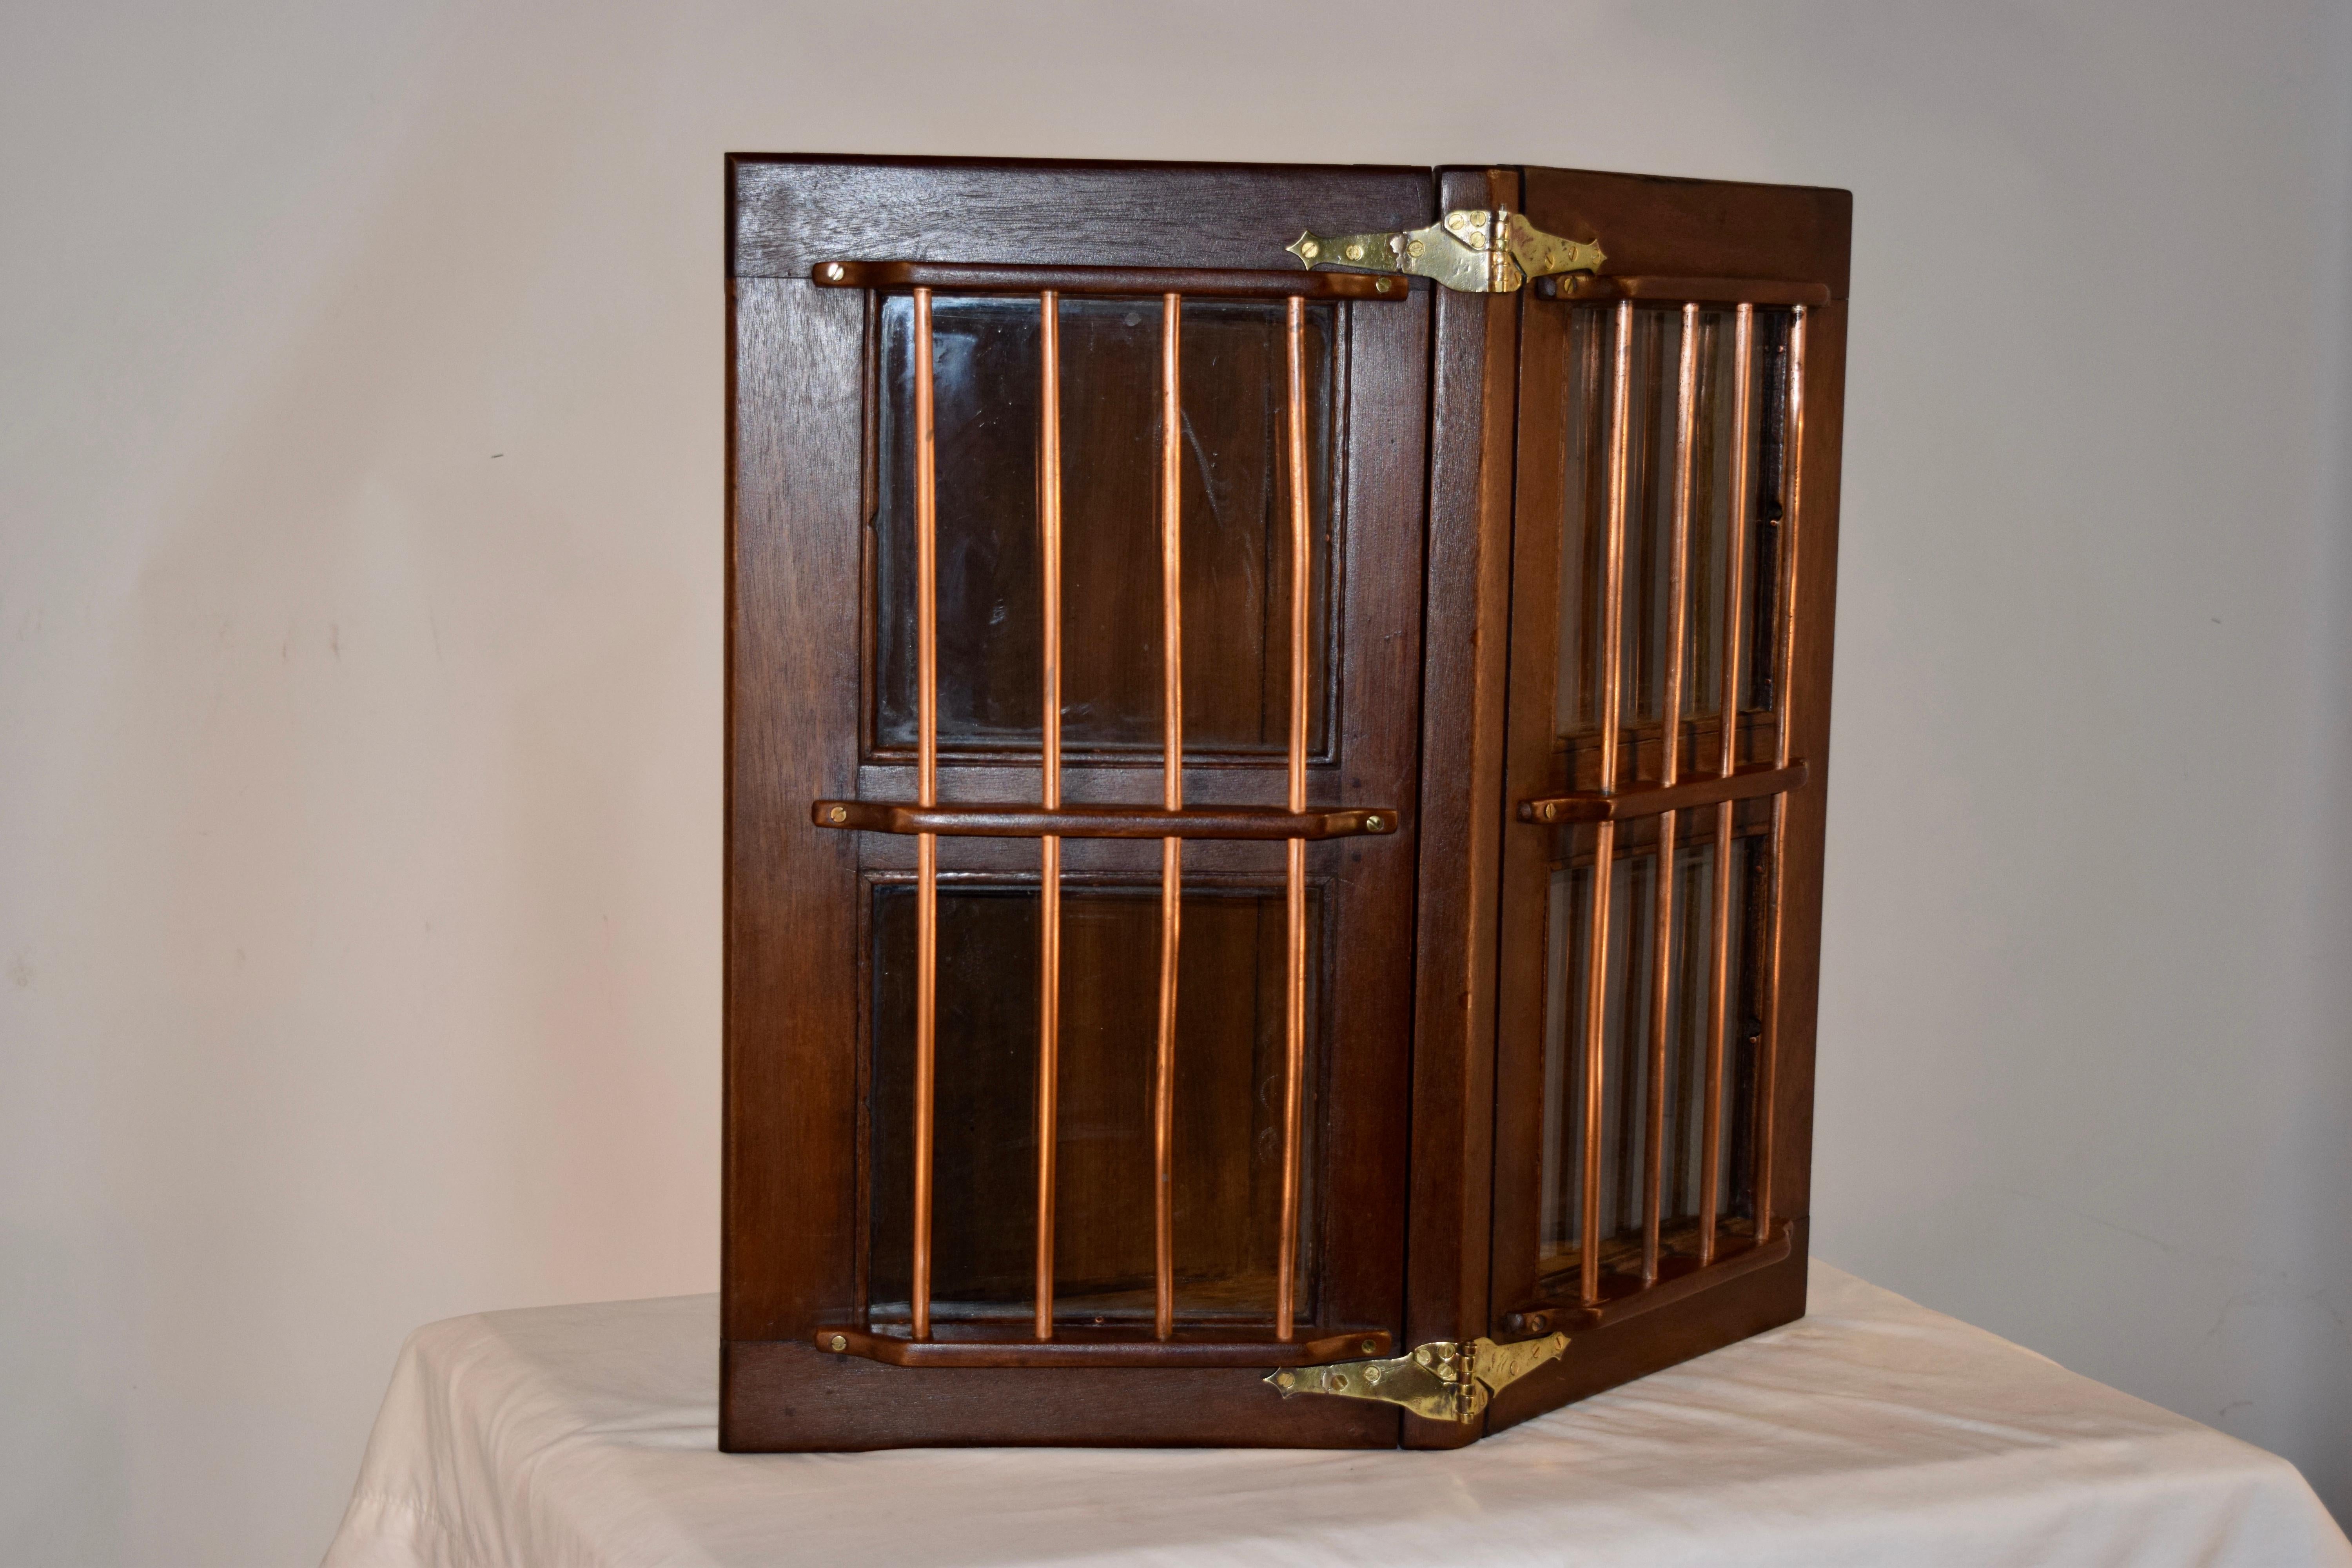 19th Century ship's hatch doors from England made from teak wood and copper rods, which have been added to a custom cabinet back for a unique addition to any room in your home. The doors open to reveal shelving.